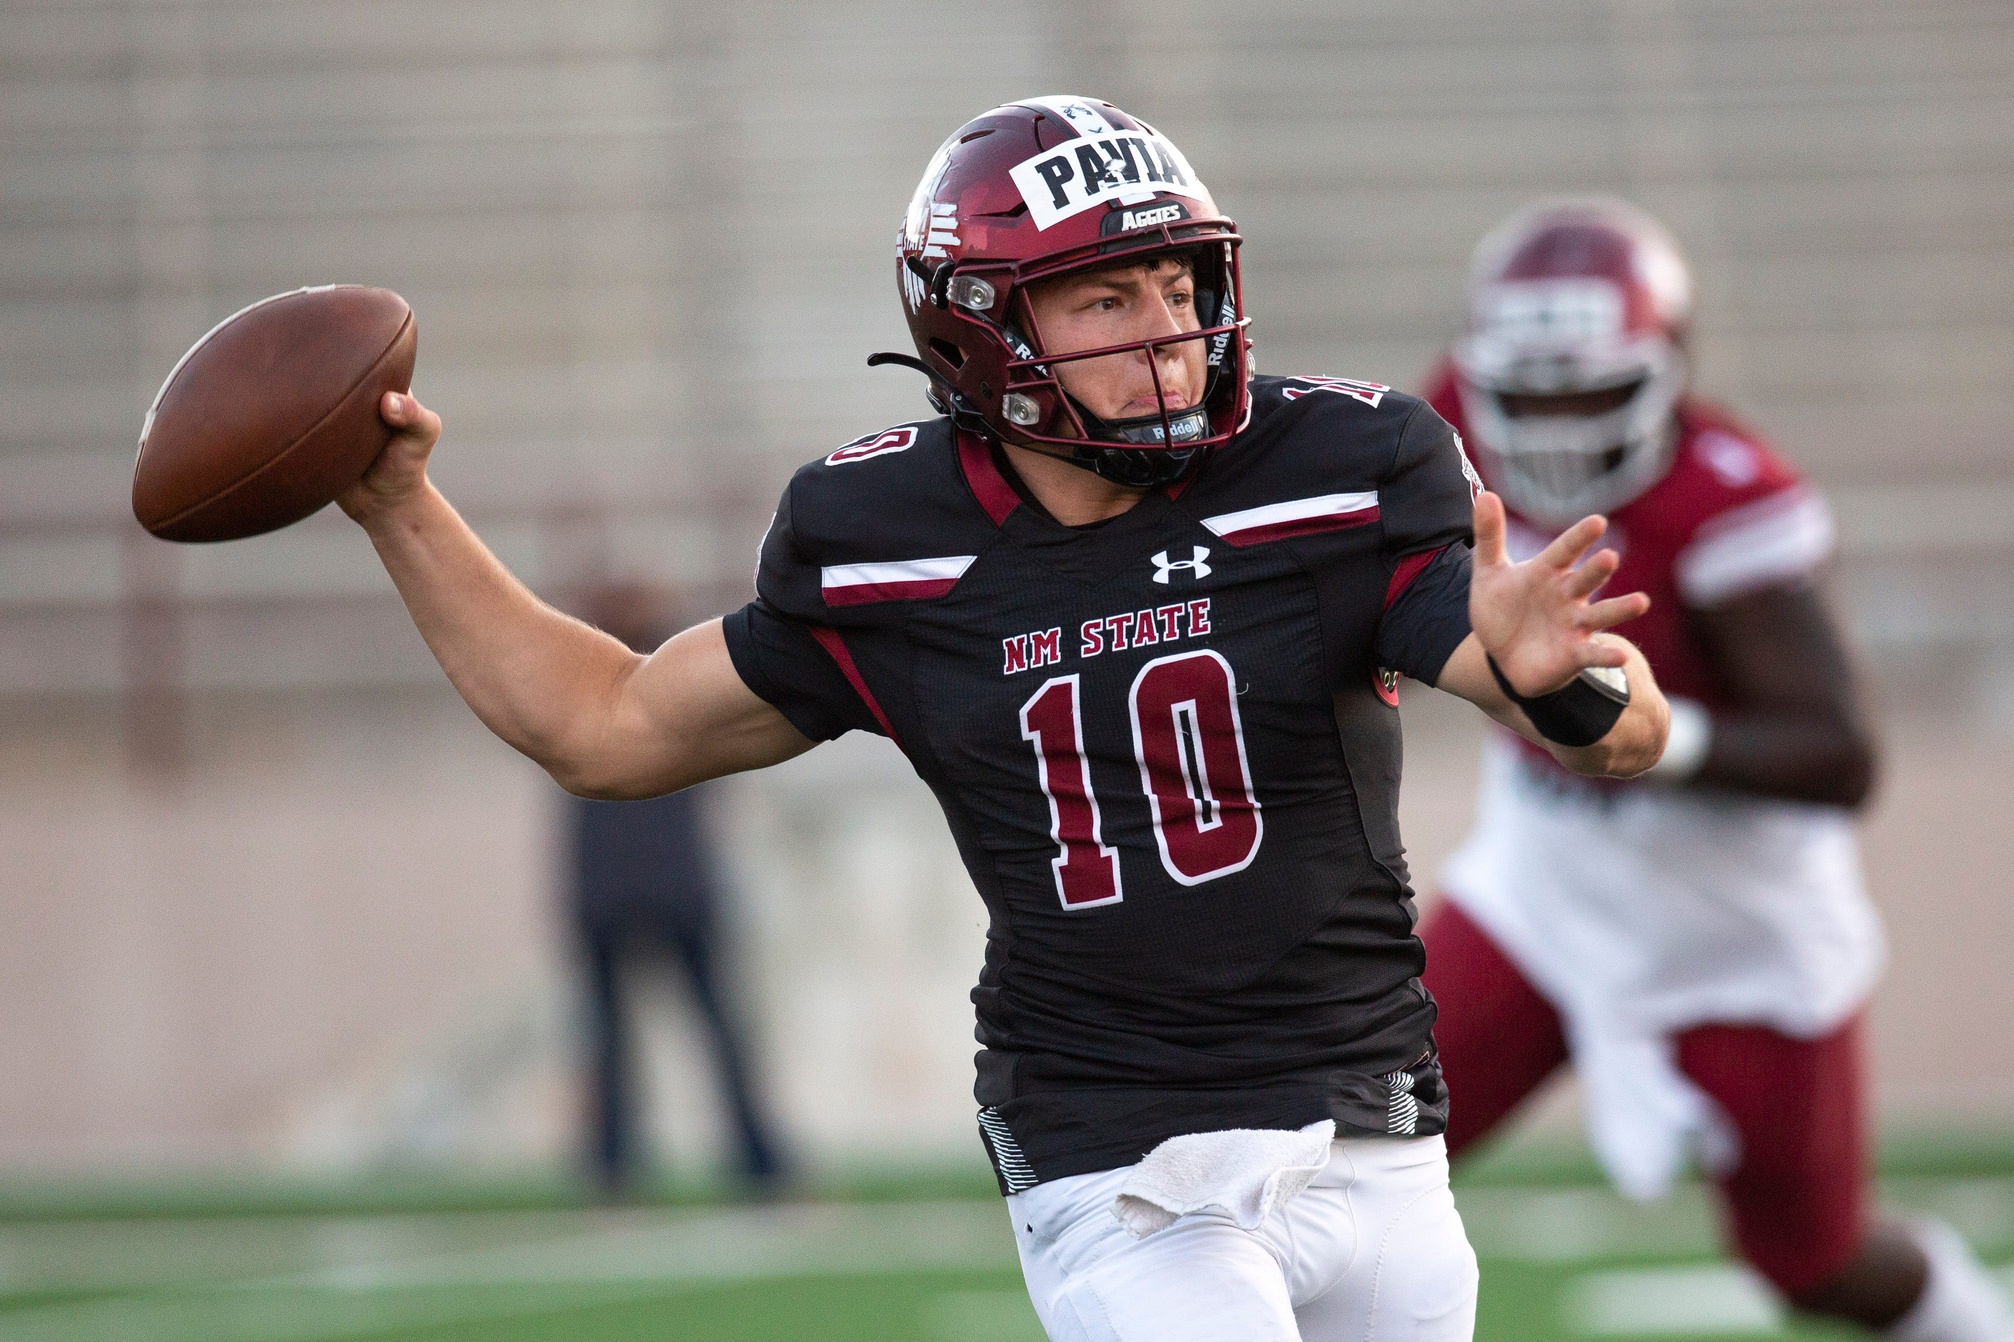 Aggie quarterback Diego Pavia passes thee ball during a New Mexico State spring football game on Thursday, April 20, 2023, at Aggie Memorial Stadium.